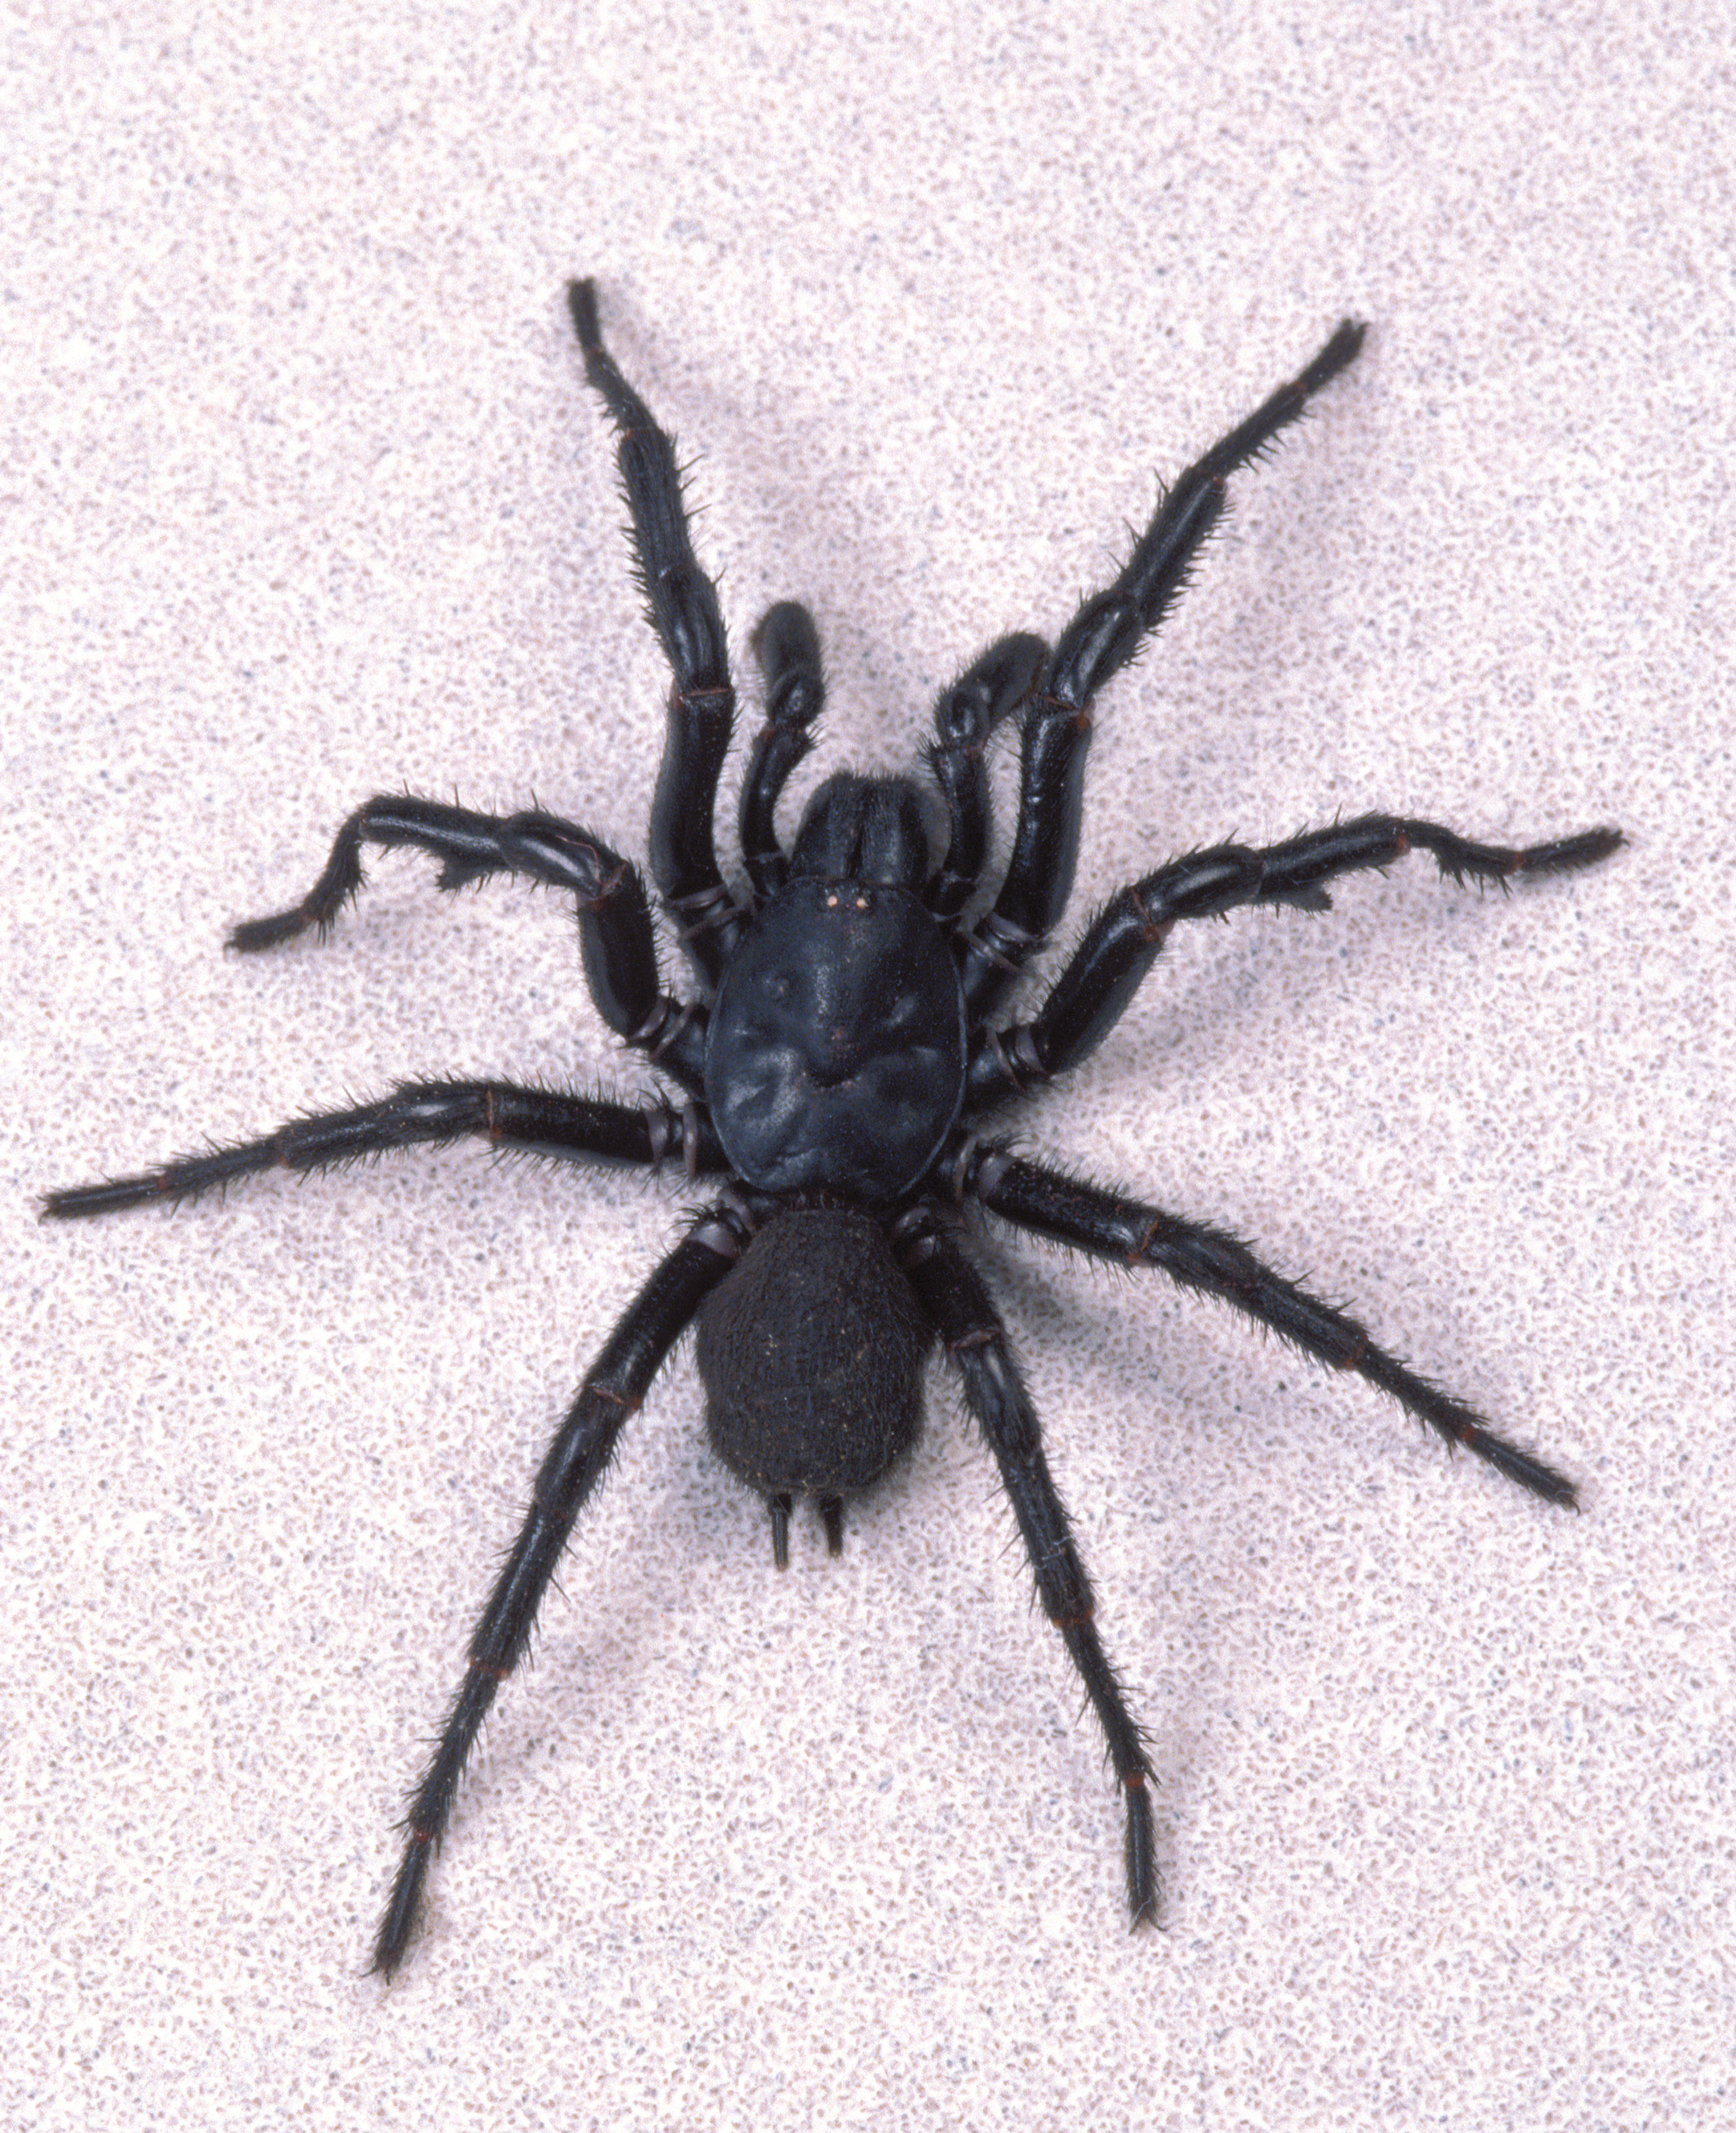 Male funnel spider one of the most dangerous spiders in Australia